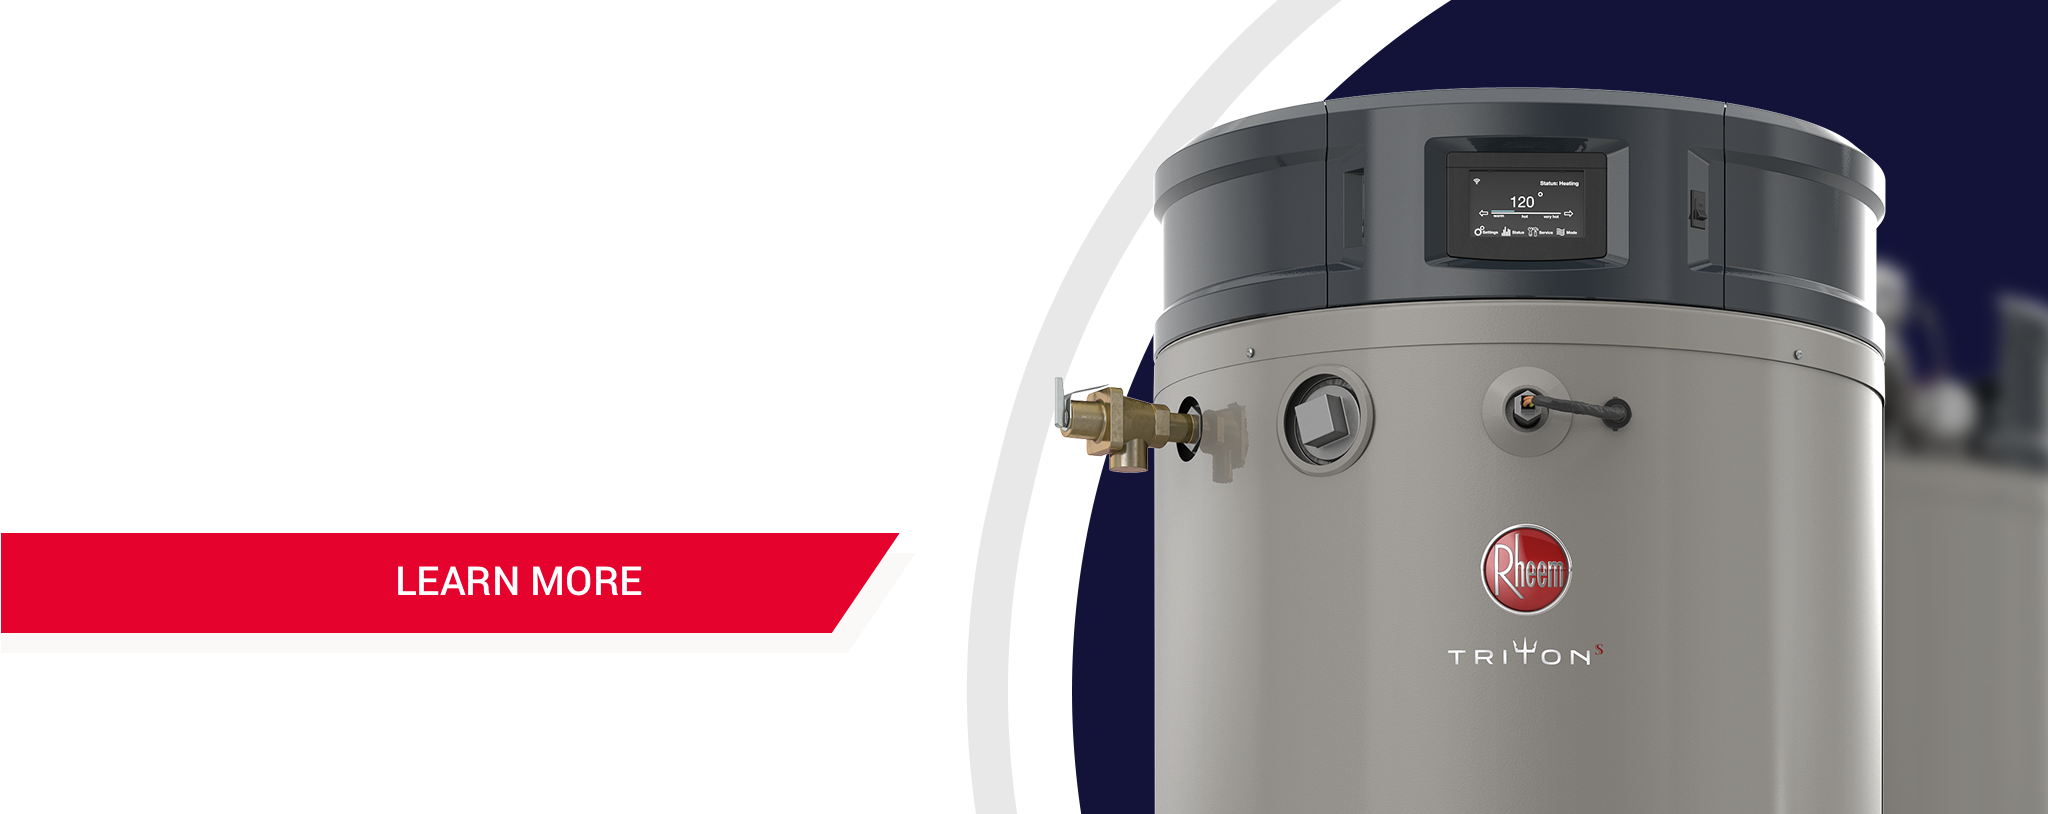 Triton - The Most Intelligent High-Efficiency Commercial Gas Water Heater In The Market